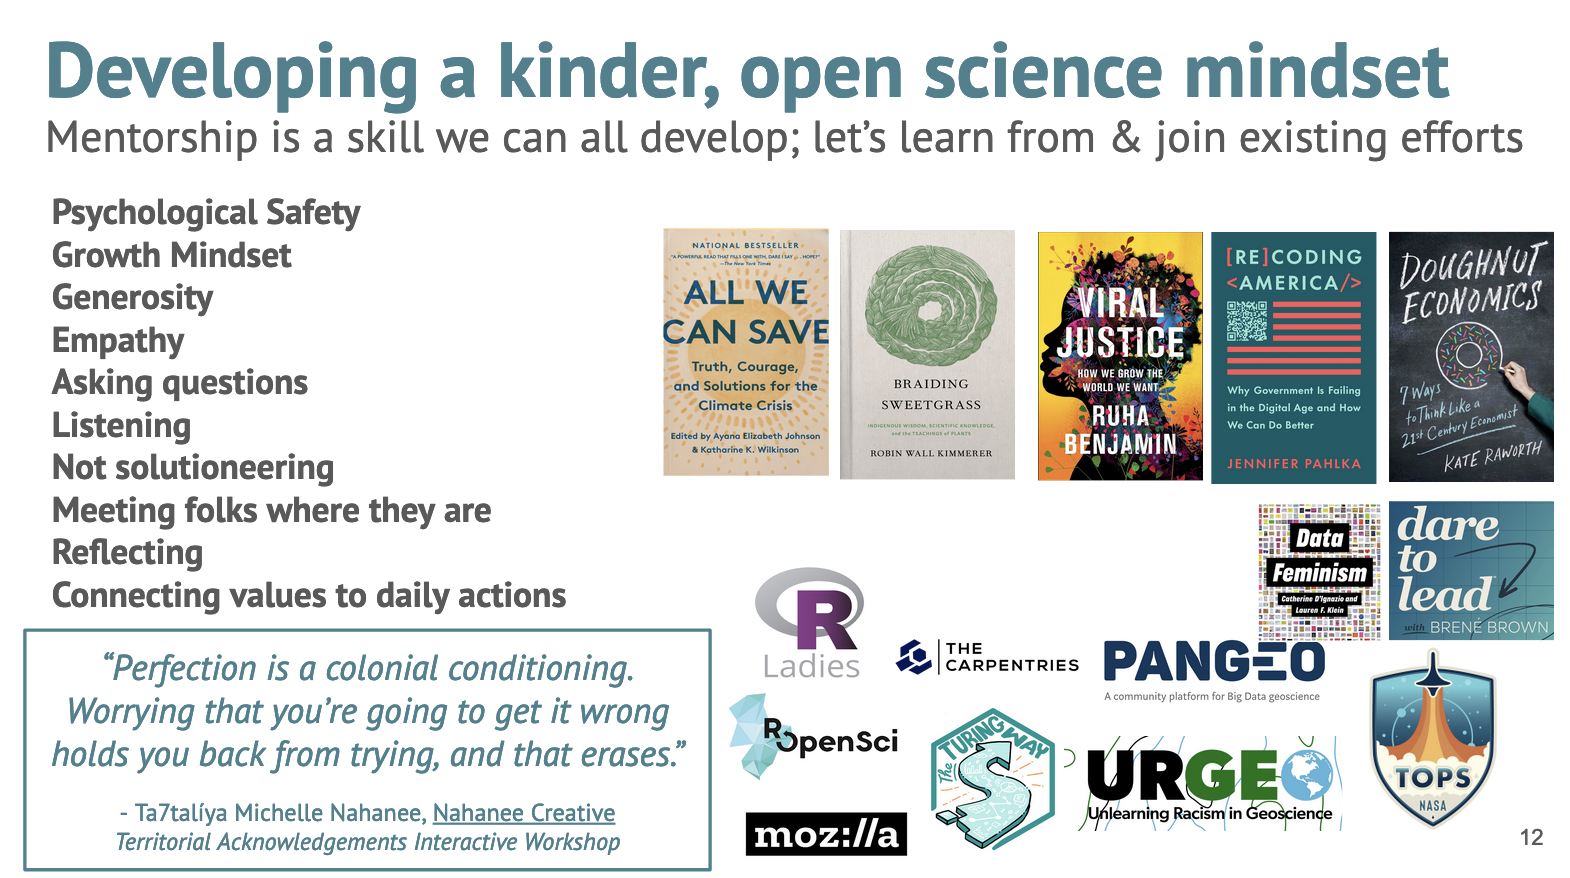 Screenshot of slide 12 from AGU talk. See slides link at top of post for text details. Developing a kinder, open science mindset. Mentorship is a skill we can all develop; let's learn from & join existing efforts. Example list: . quote from Ta7talíya Michelle Nahanee: 'Perfection is a colonial conditioning. Worrying that you’re going to get it wrong holds you back from trying, and that erases.' Right side has images of book covers and organization logos